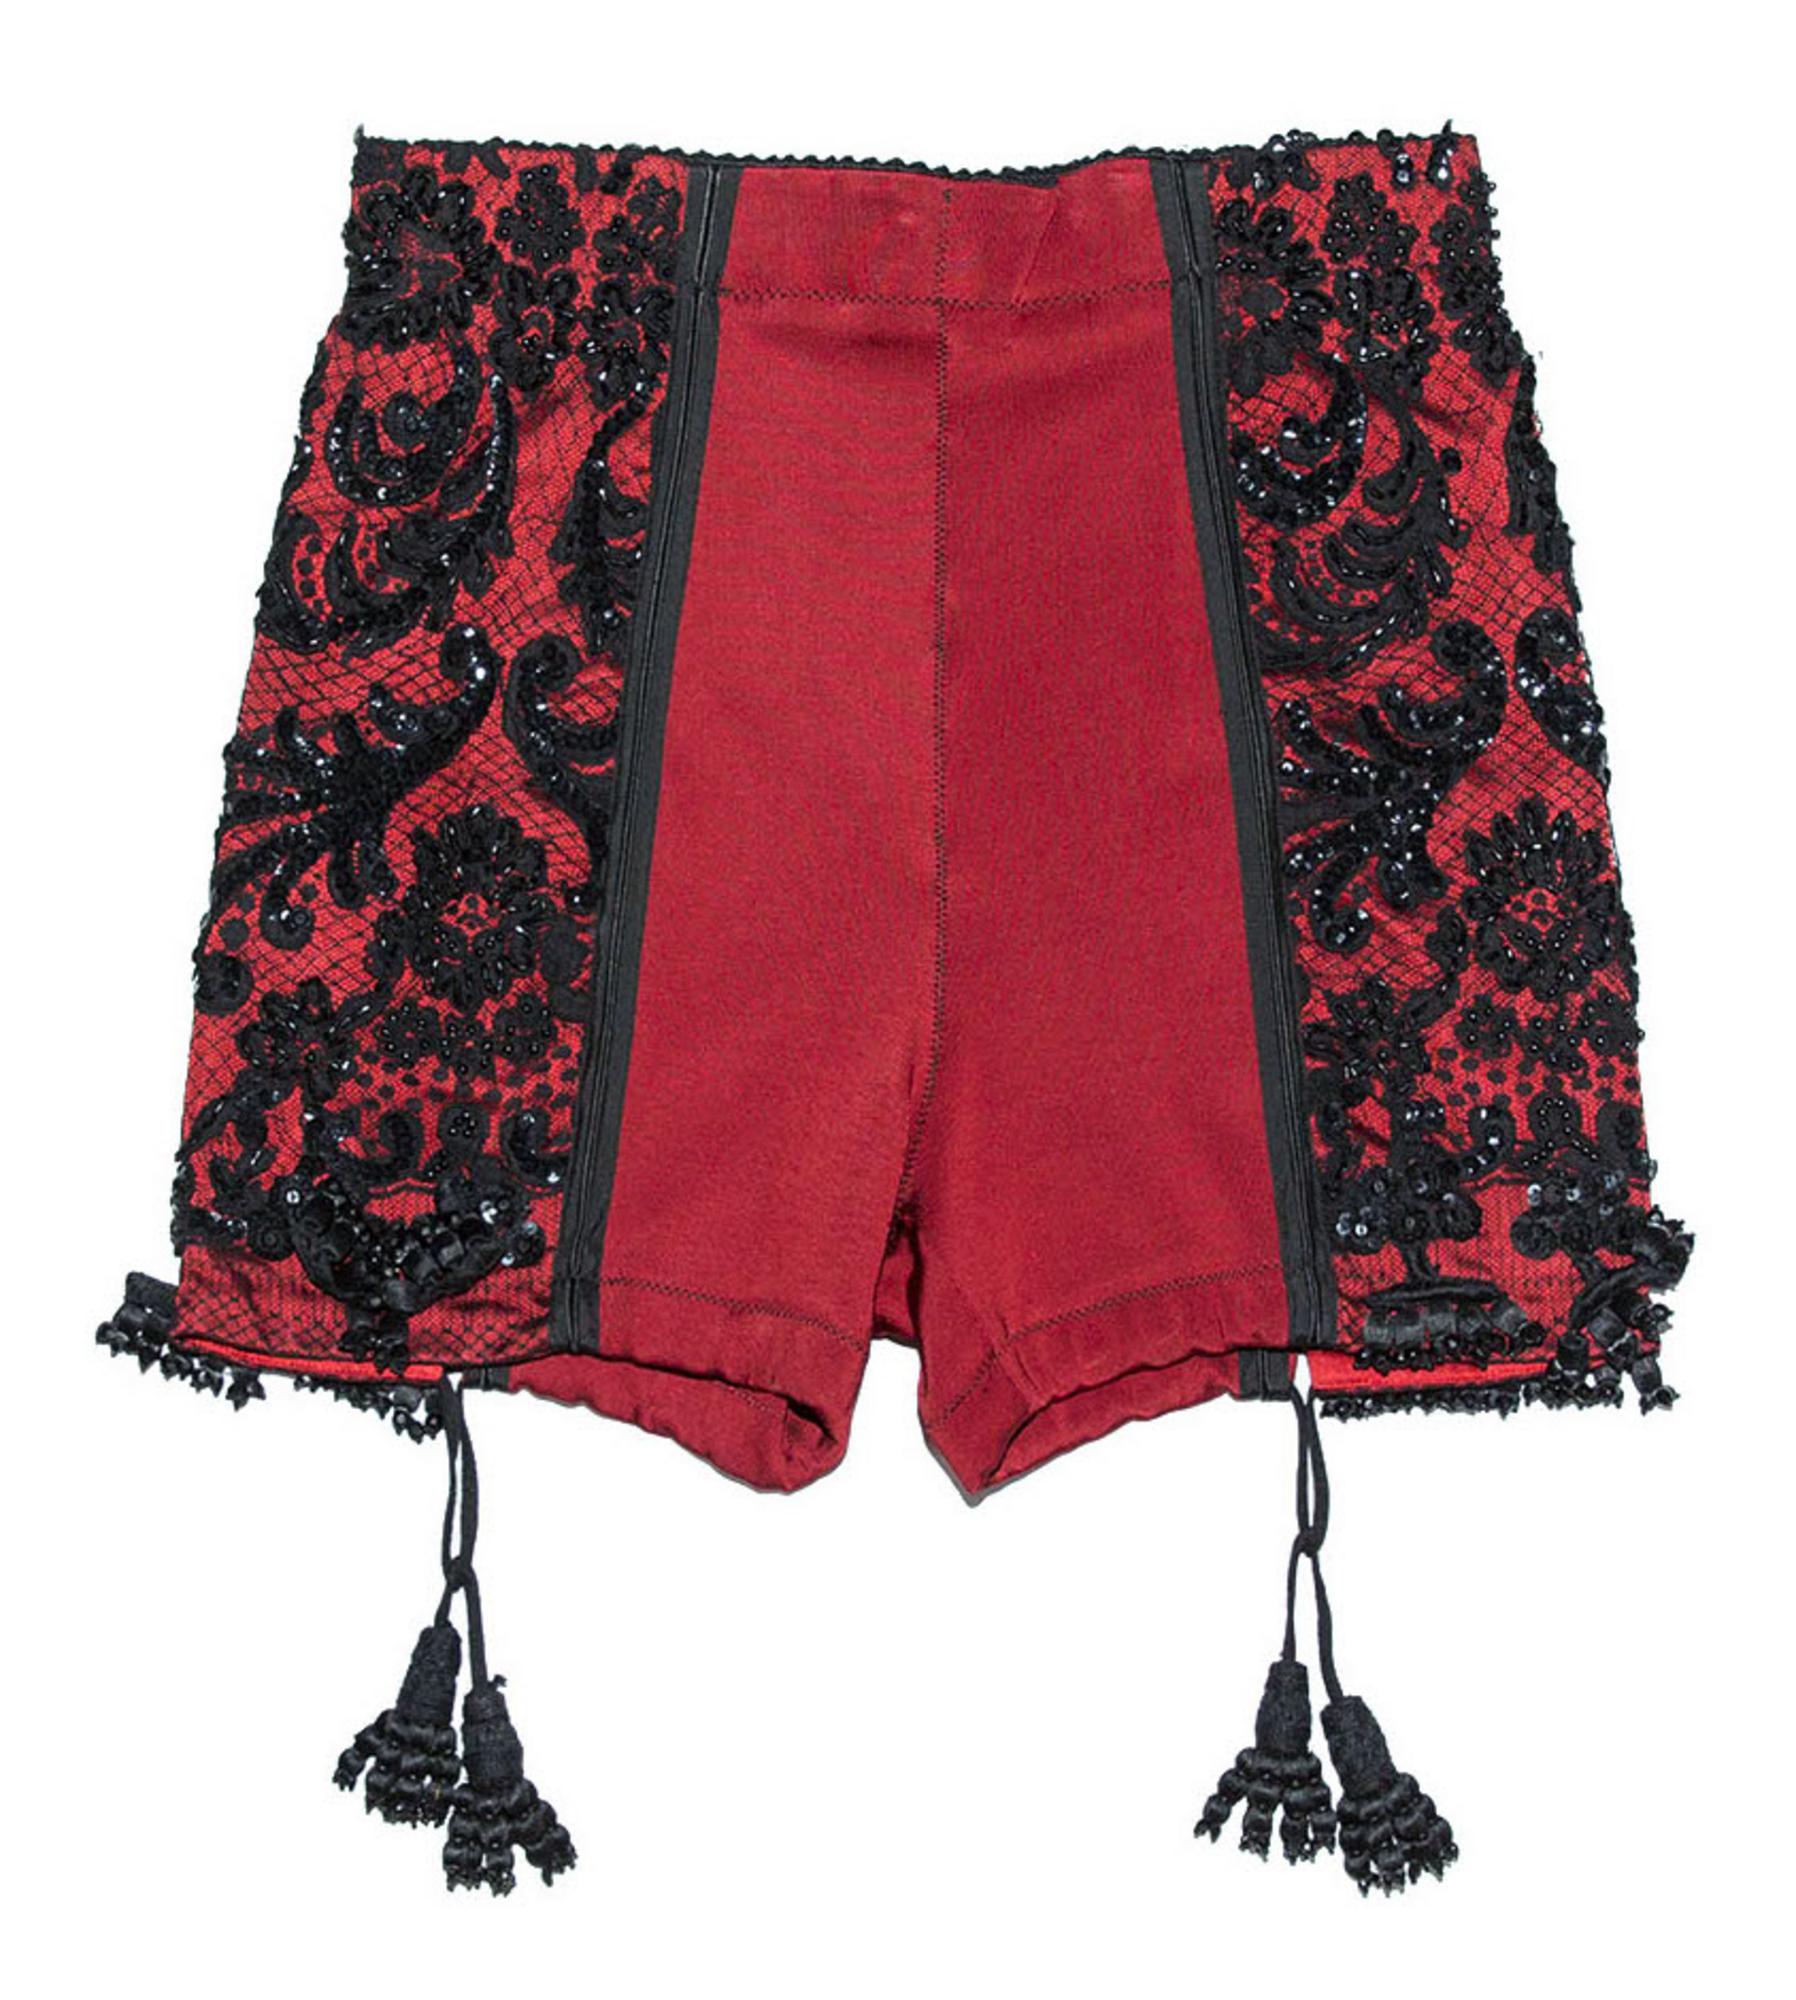 Jean Paul Gaultier LACE SHORTS Description: Shorts in red elastic fabric with...